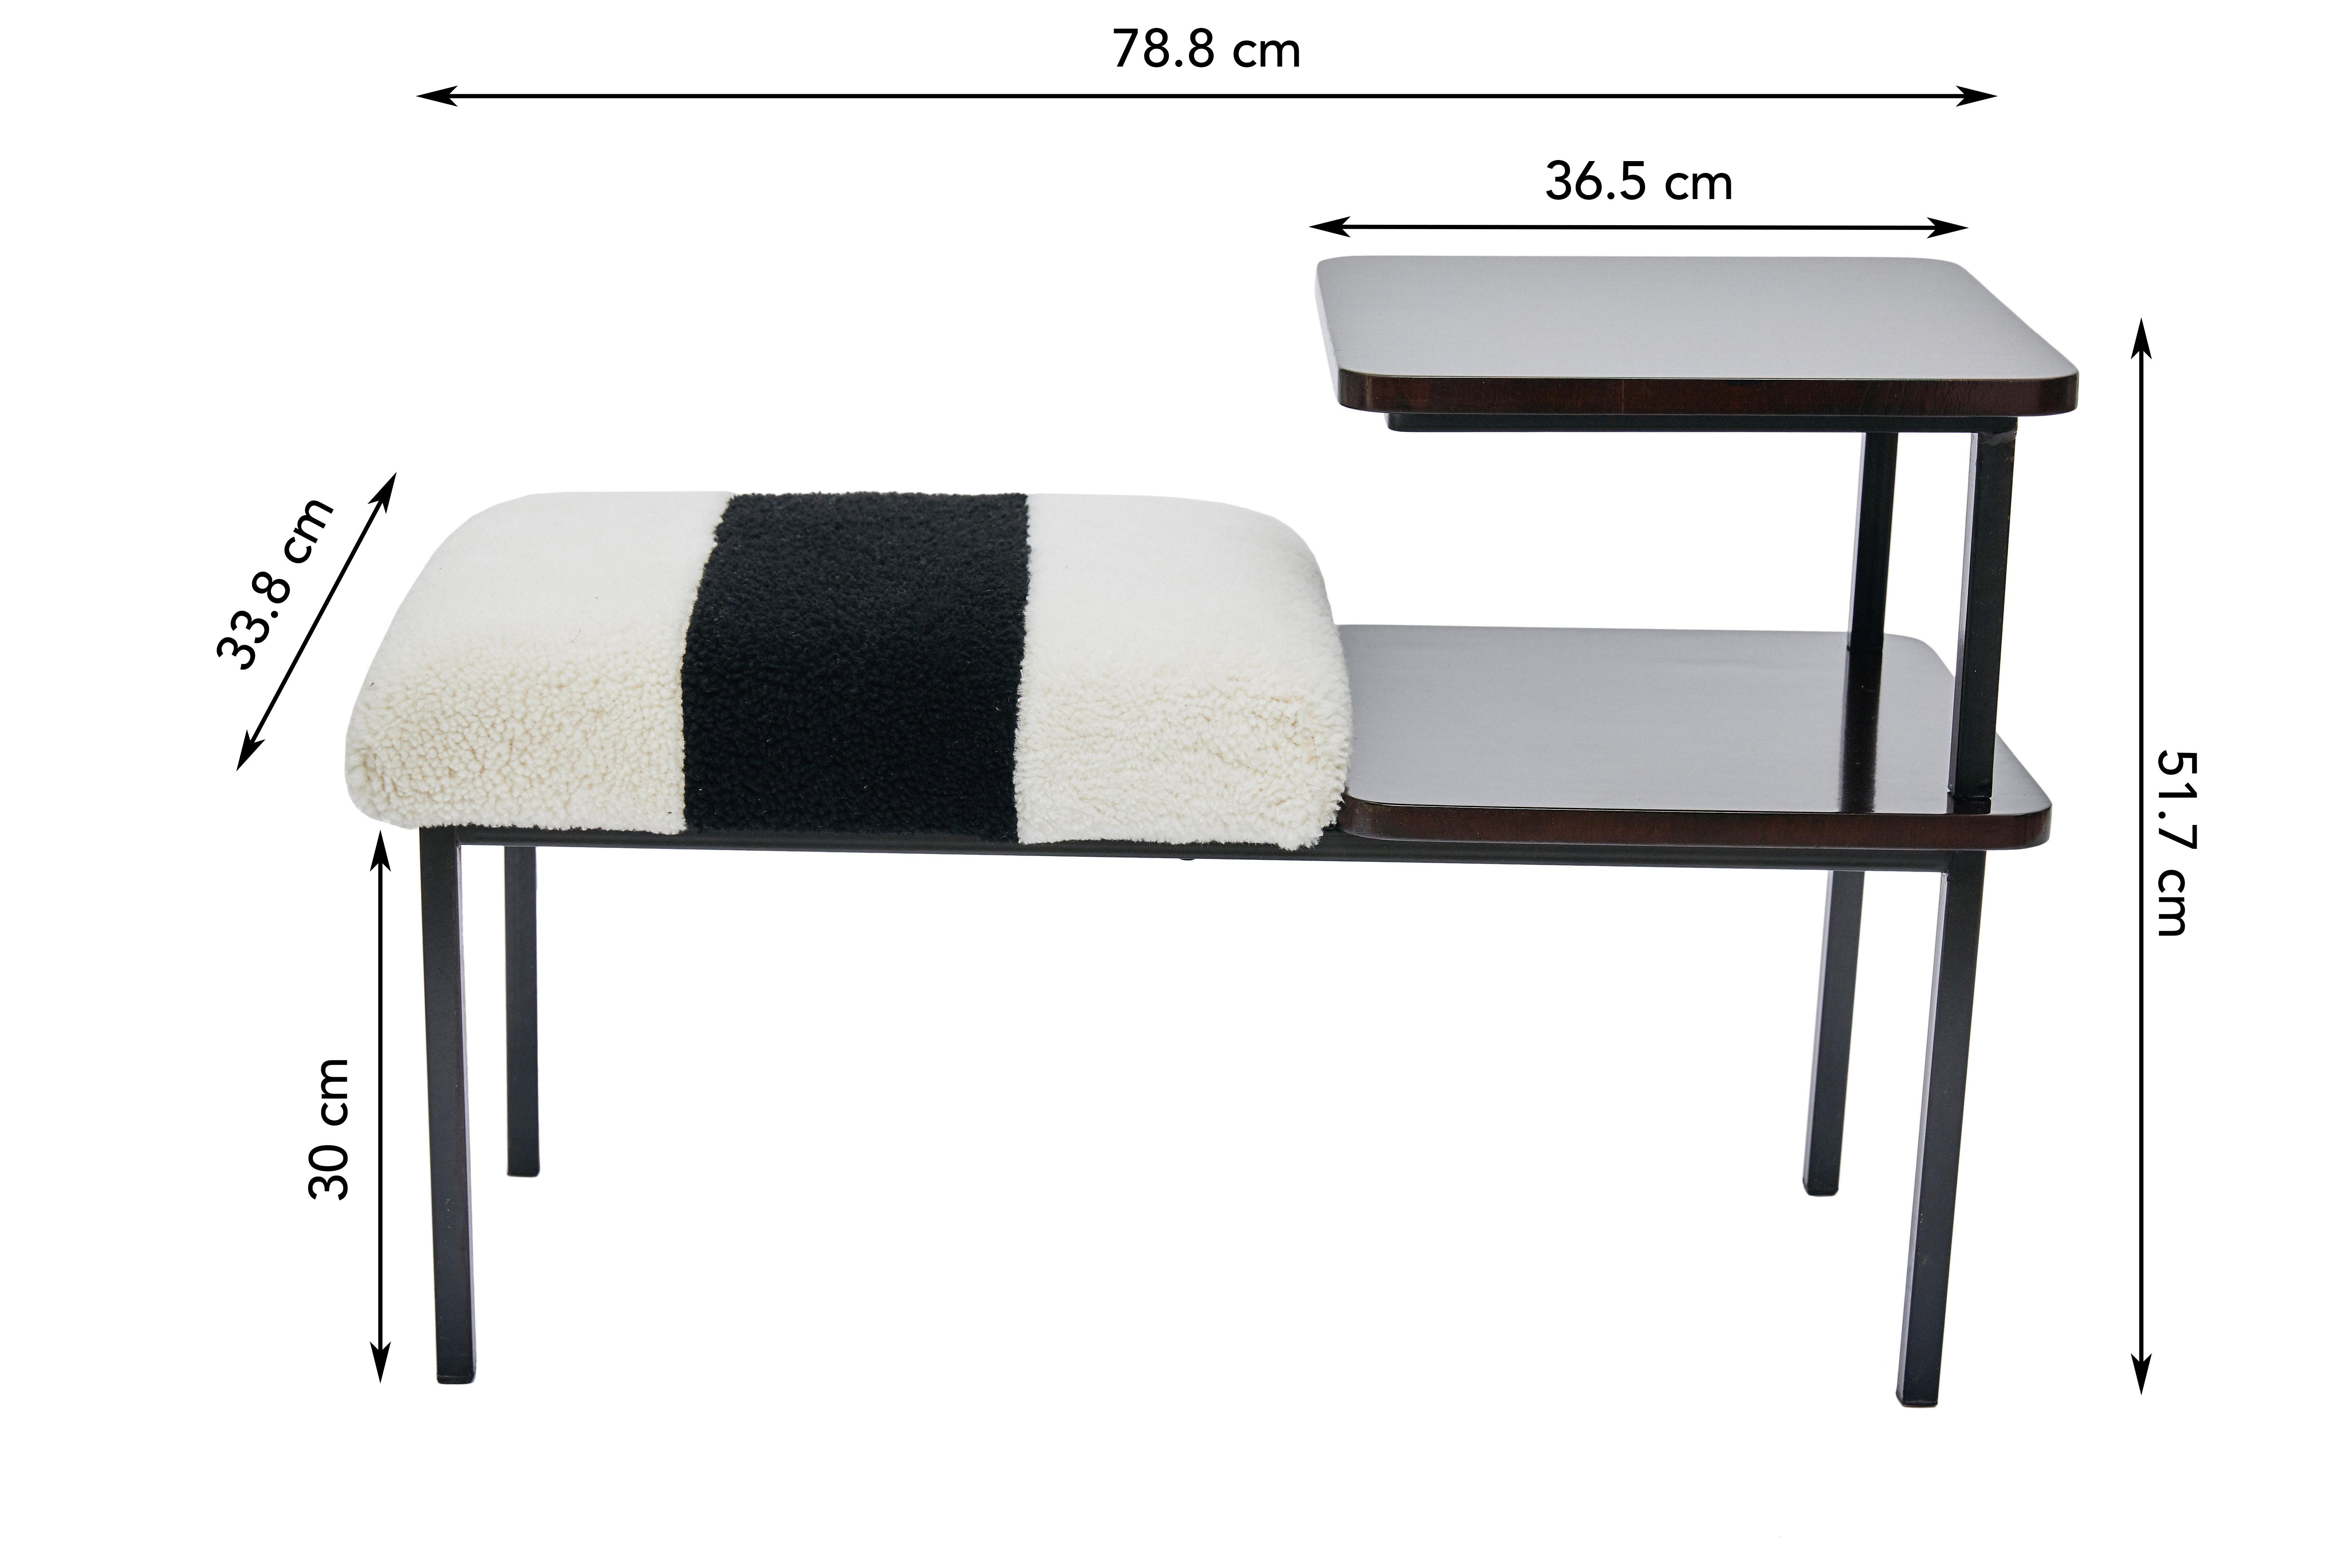 Hand-Crafted Deco Table Seat Lacquered Wood Side Table Combined Sheepskin Stool or Ottoman For Sale